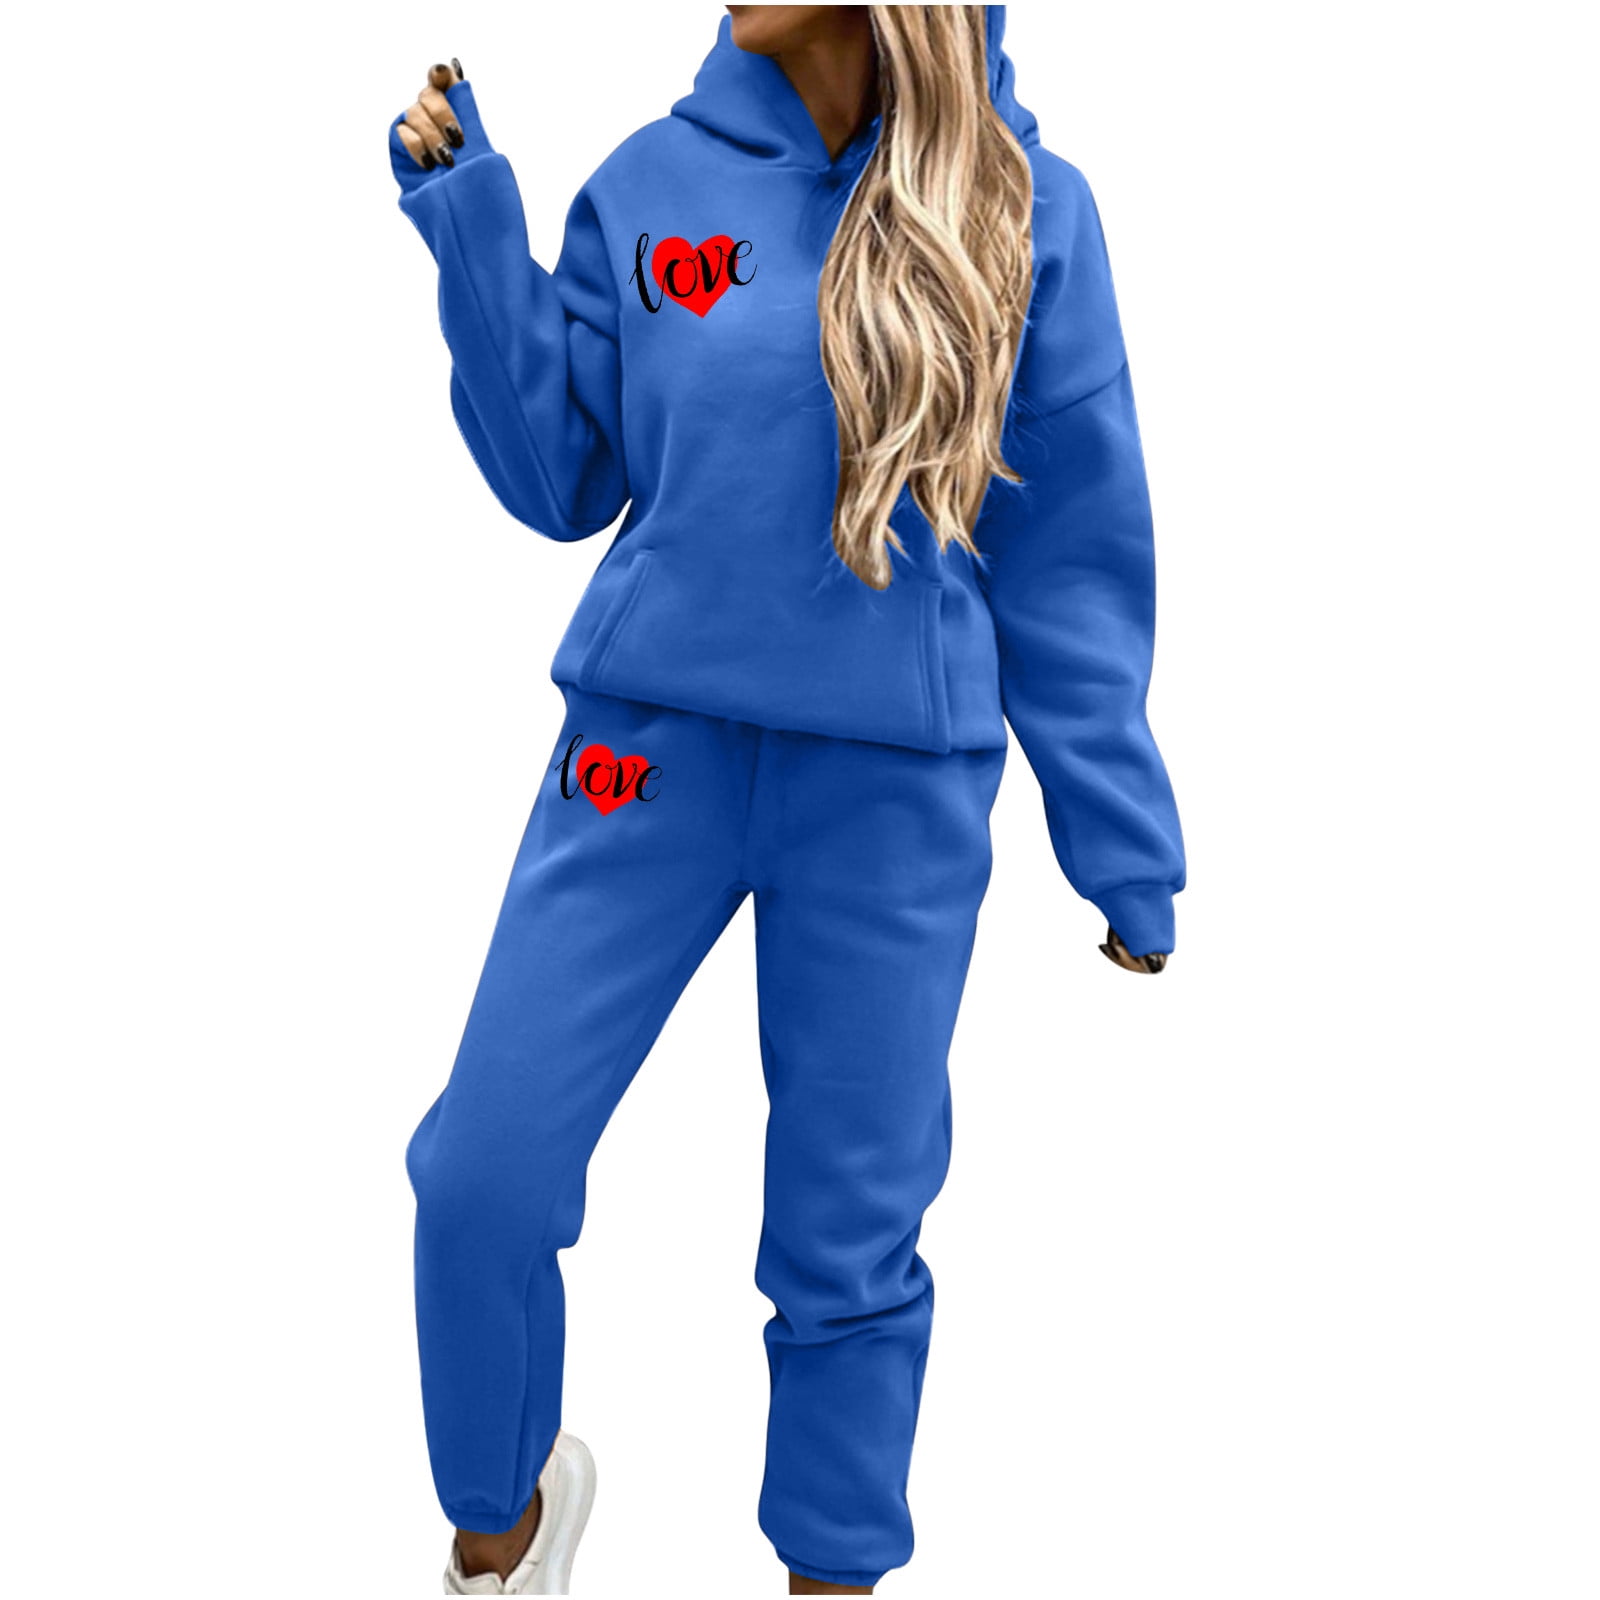 RQYYD 2 Piece Outfits for Women Long Sleeve Trendy Sweatsuits Valentines  Day Hoodie and Joggers Pant Love Heart Tracksuit Comfy Sports Set Blue XL 